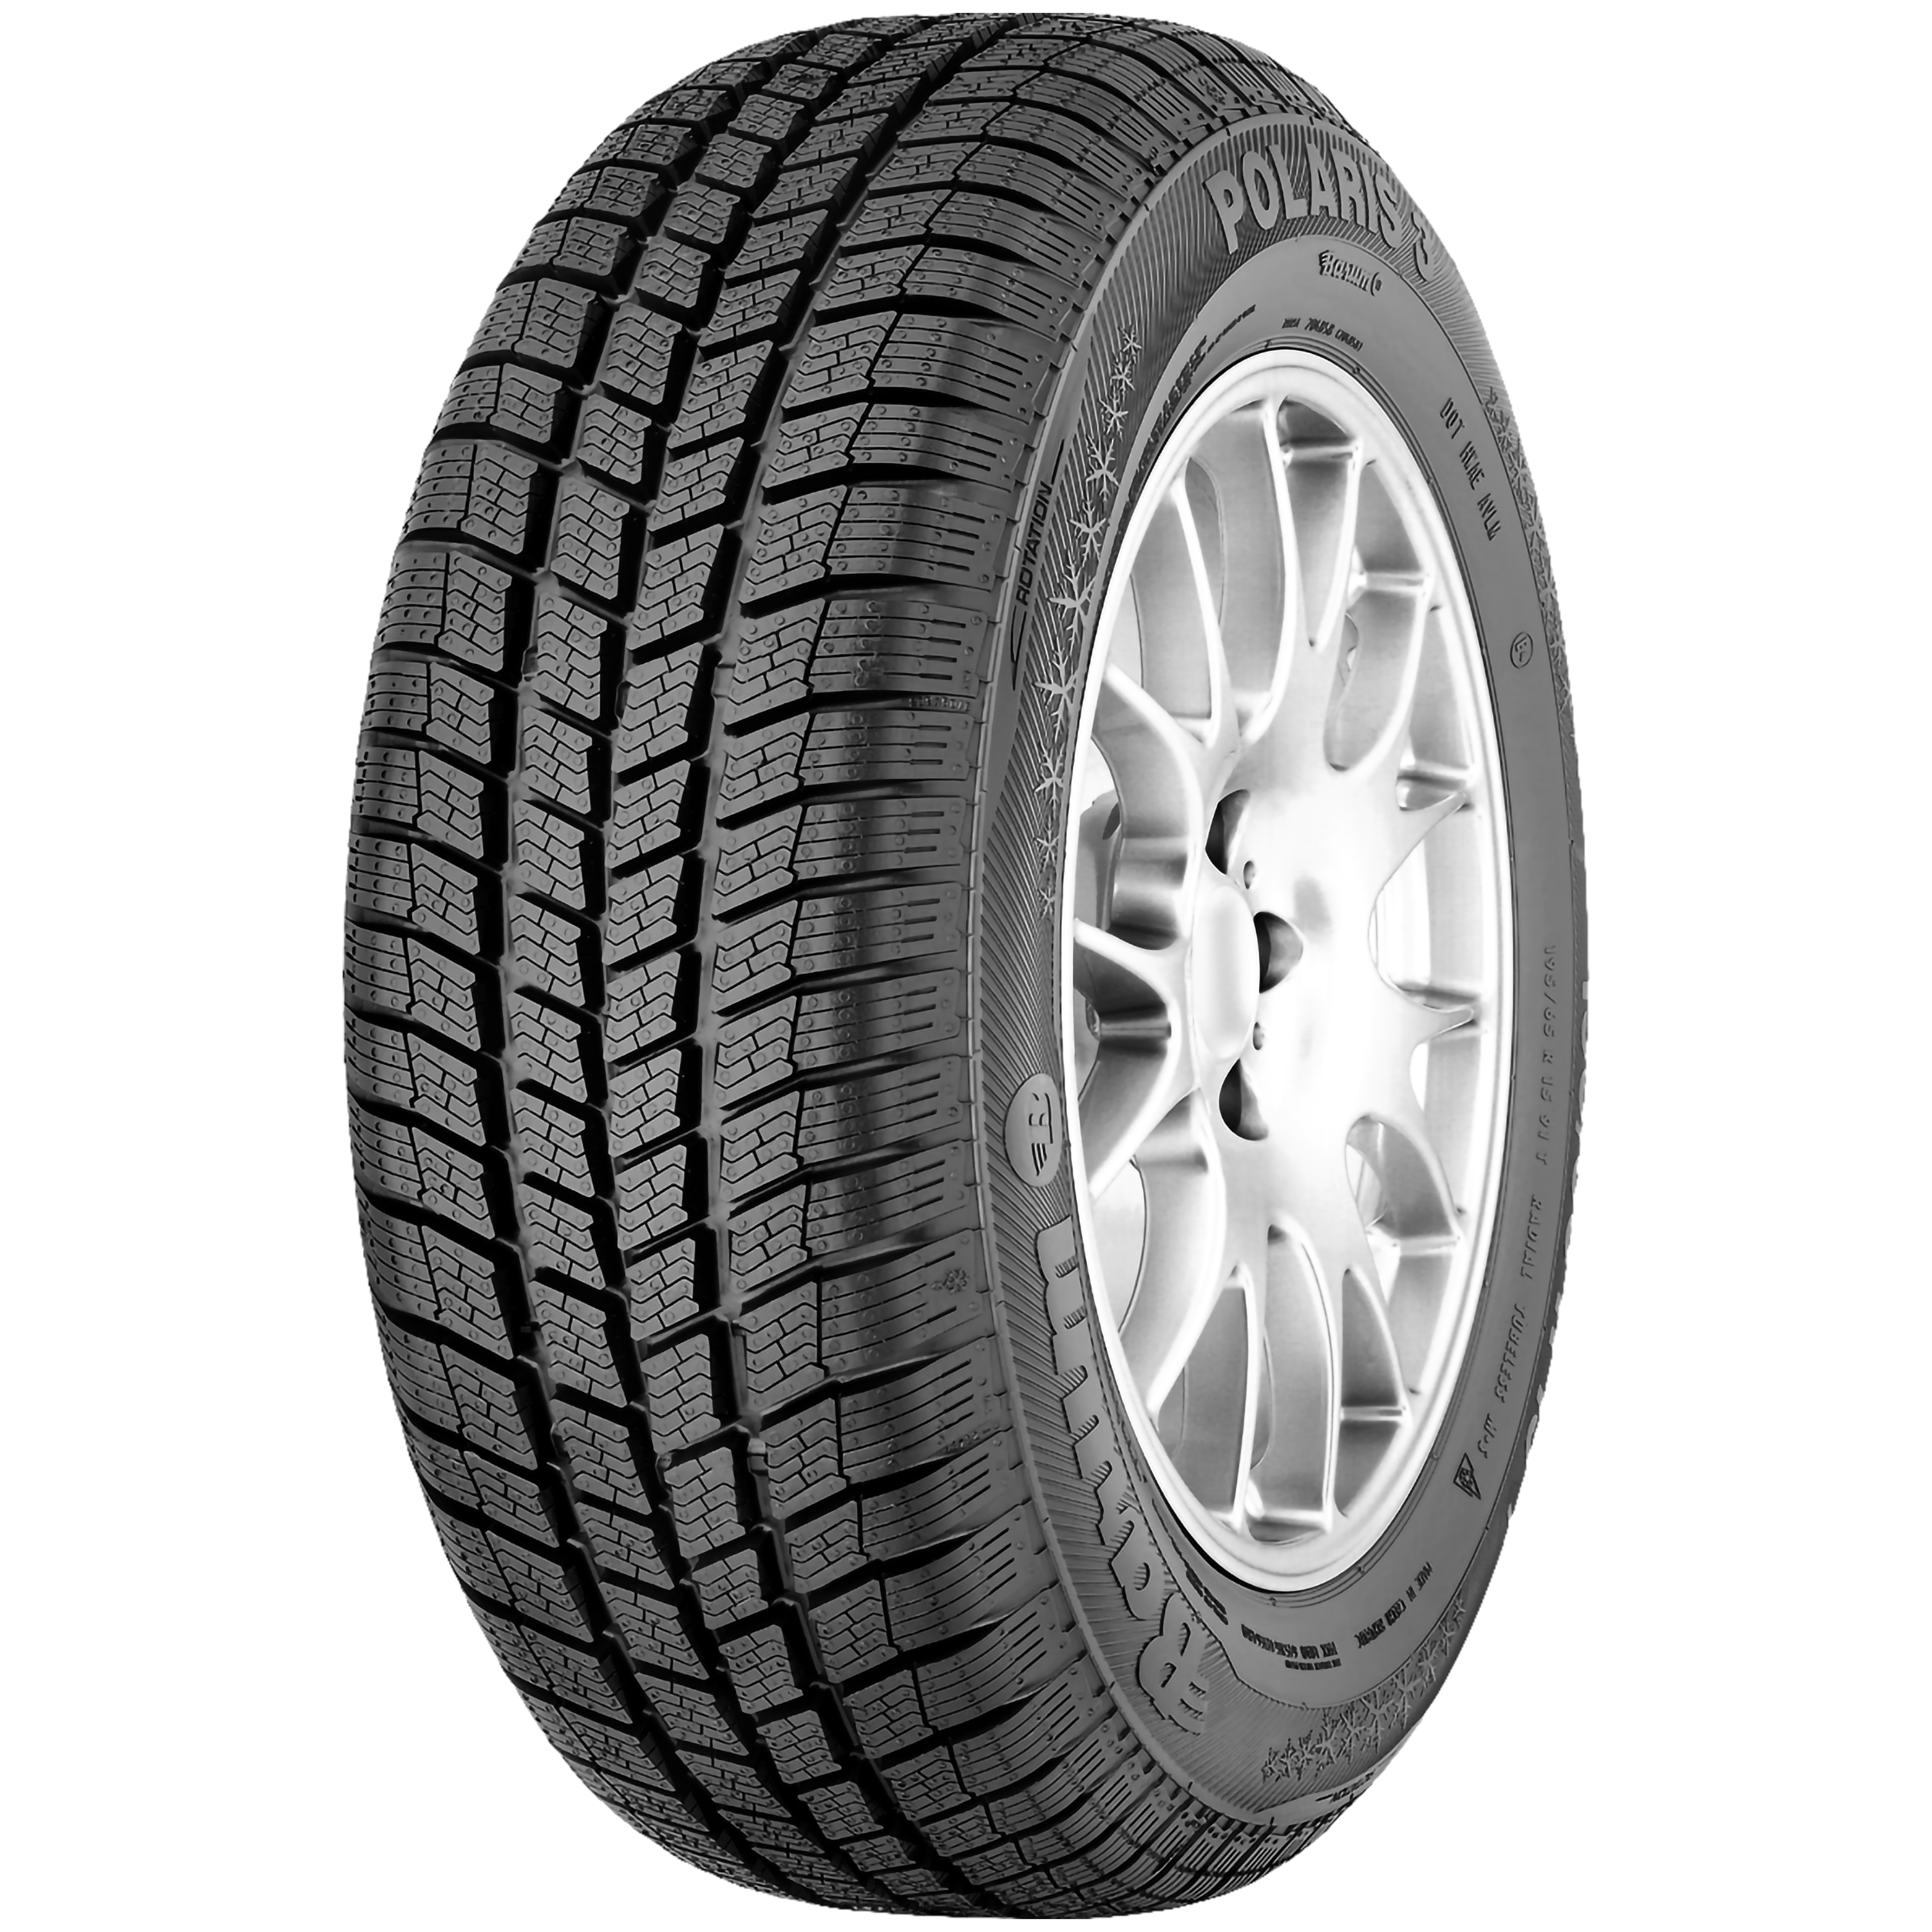 with Barum resistance tyre & | Barum consumption 3 winter Polaris - low rolling fuel car The